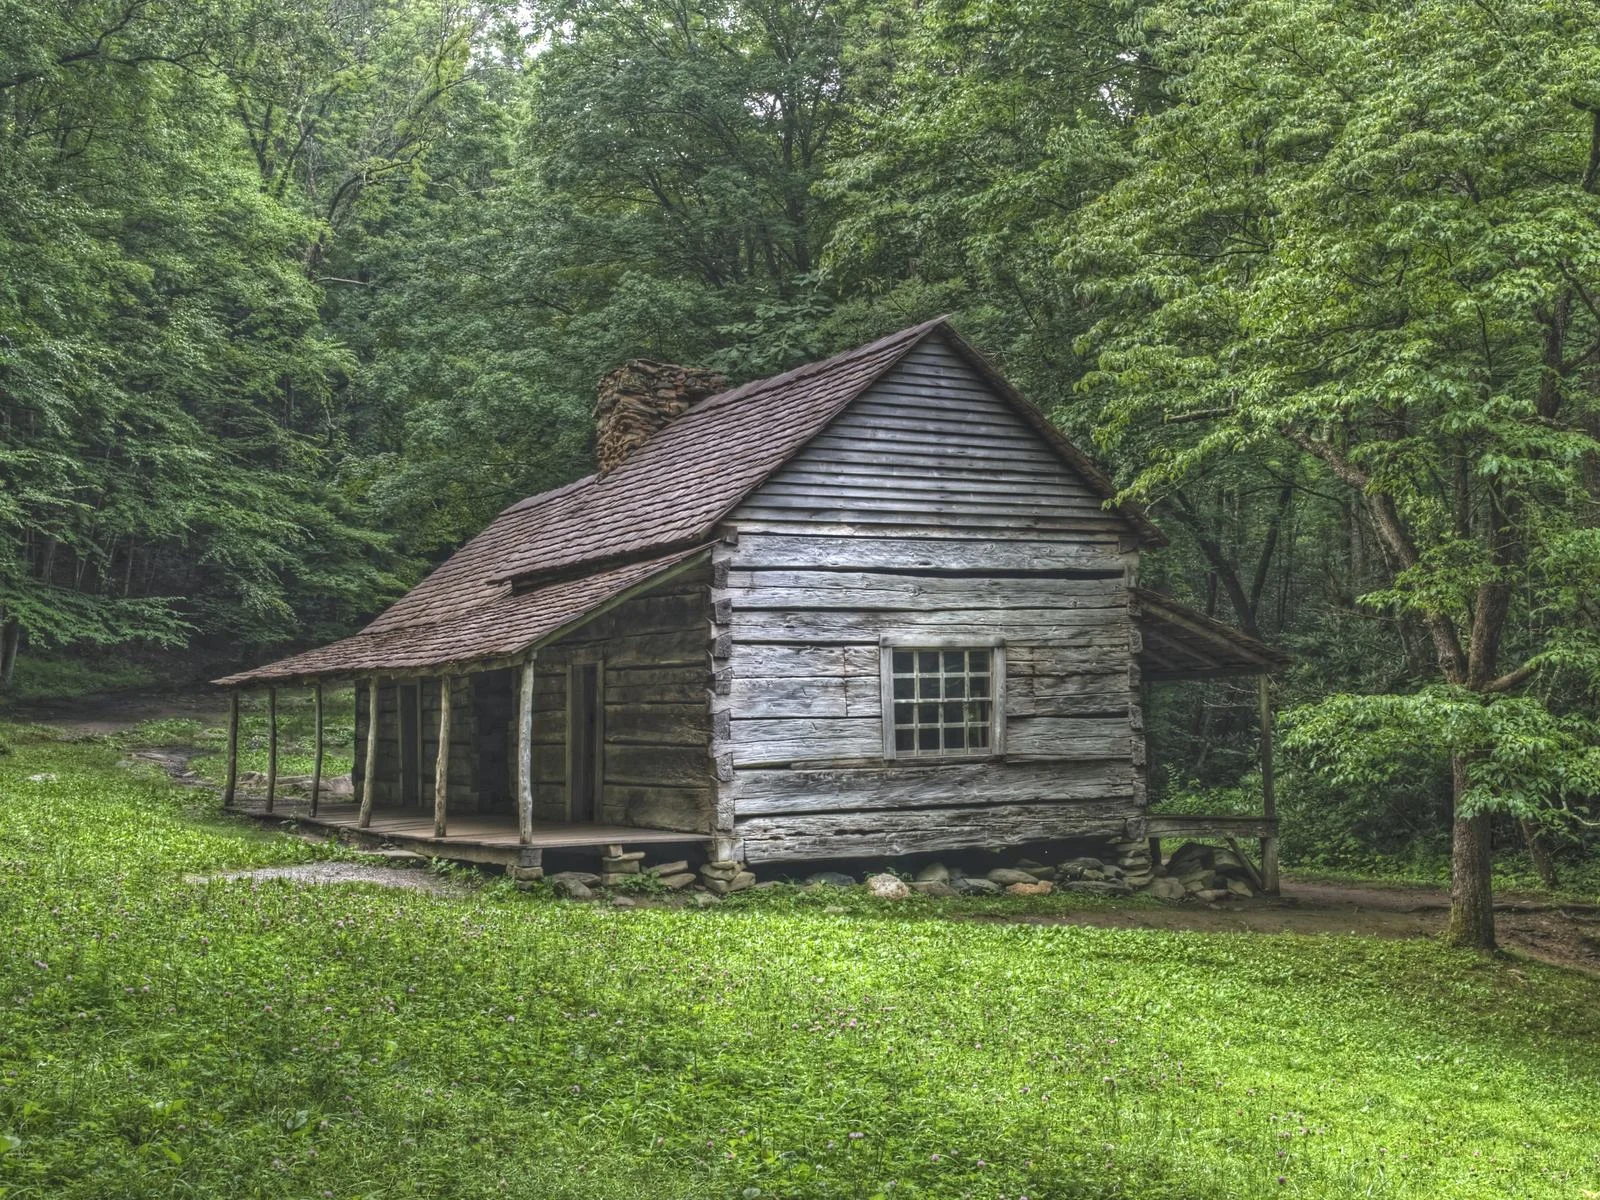 the historic and old-looking ogle log cabin is one of the best things to do in gatlinburg, tennessee, which only has one window and is surrounded by green grass and trees with thick leaves